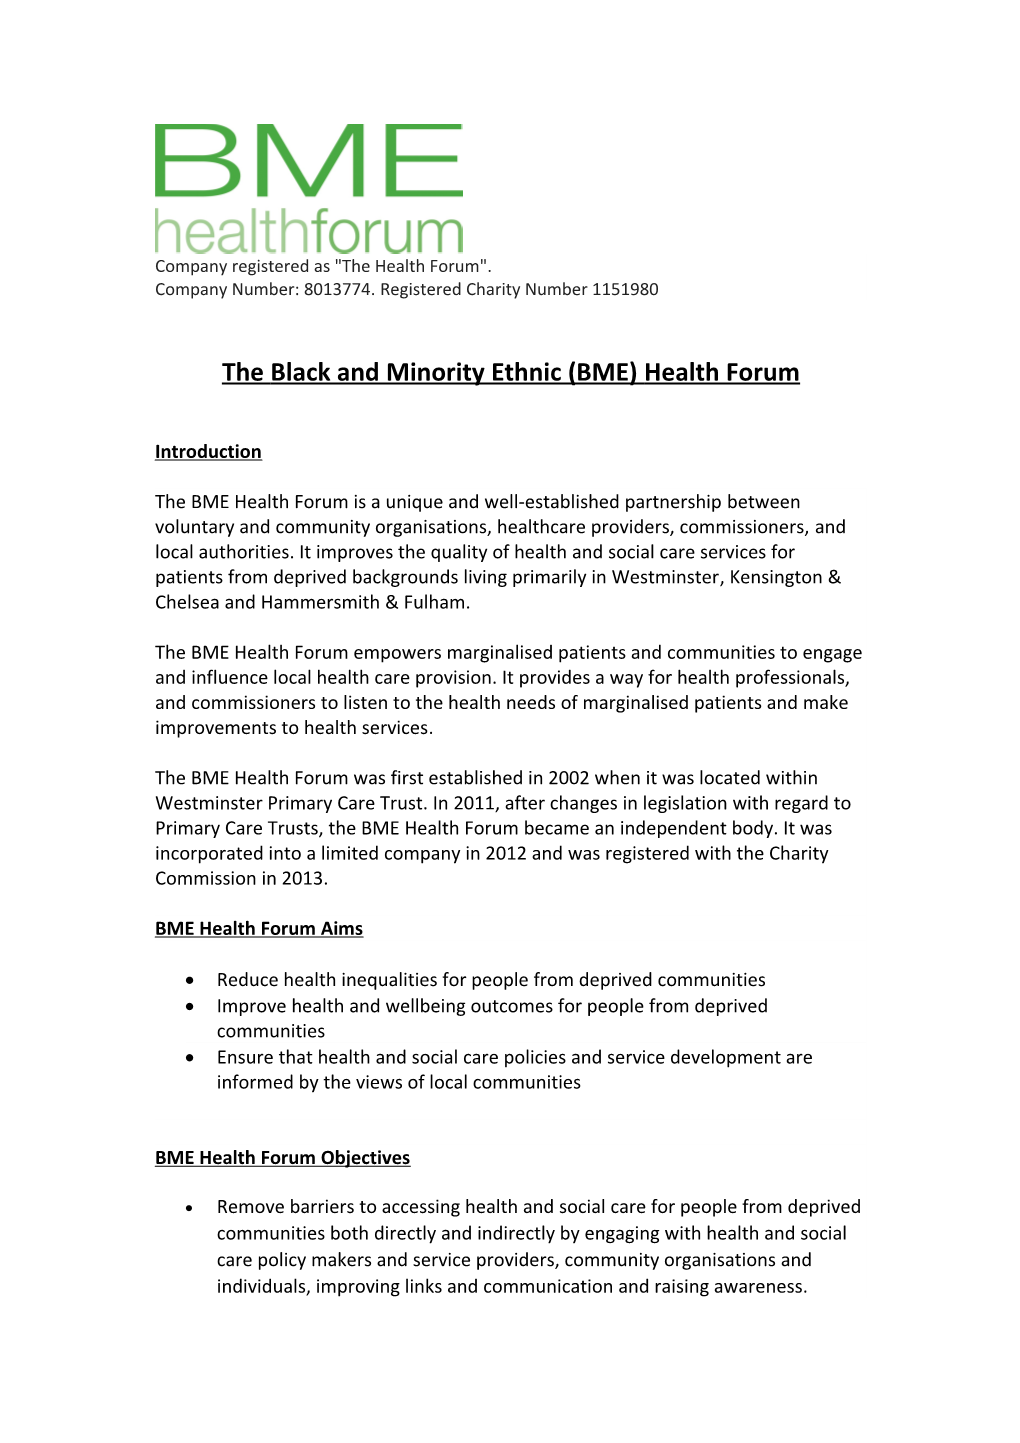 About the BME Health Forum